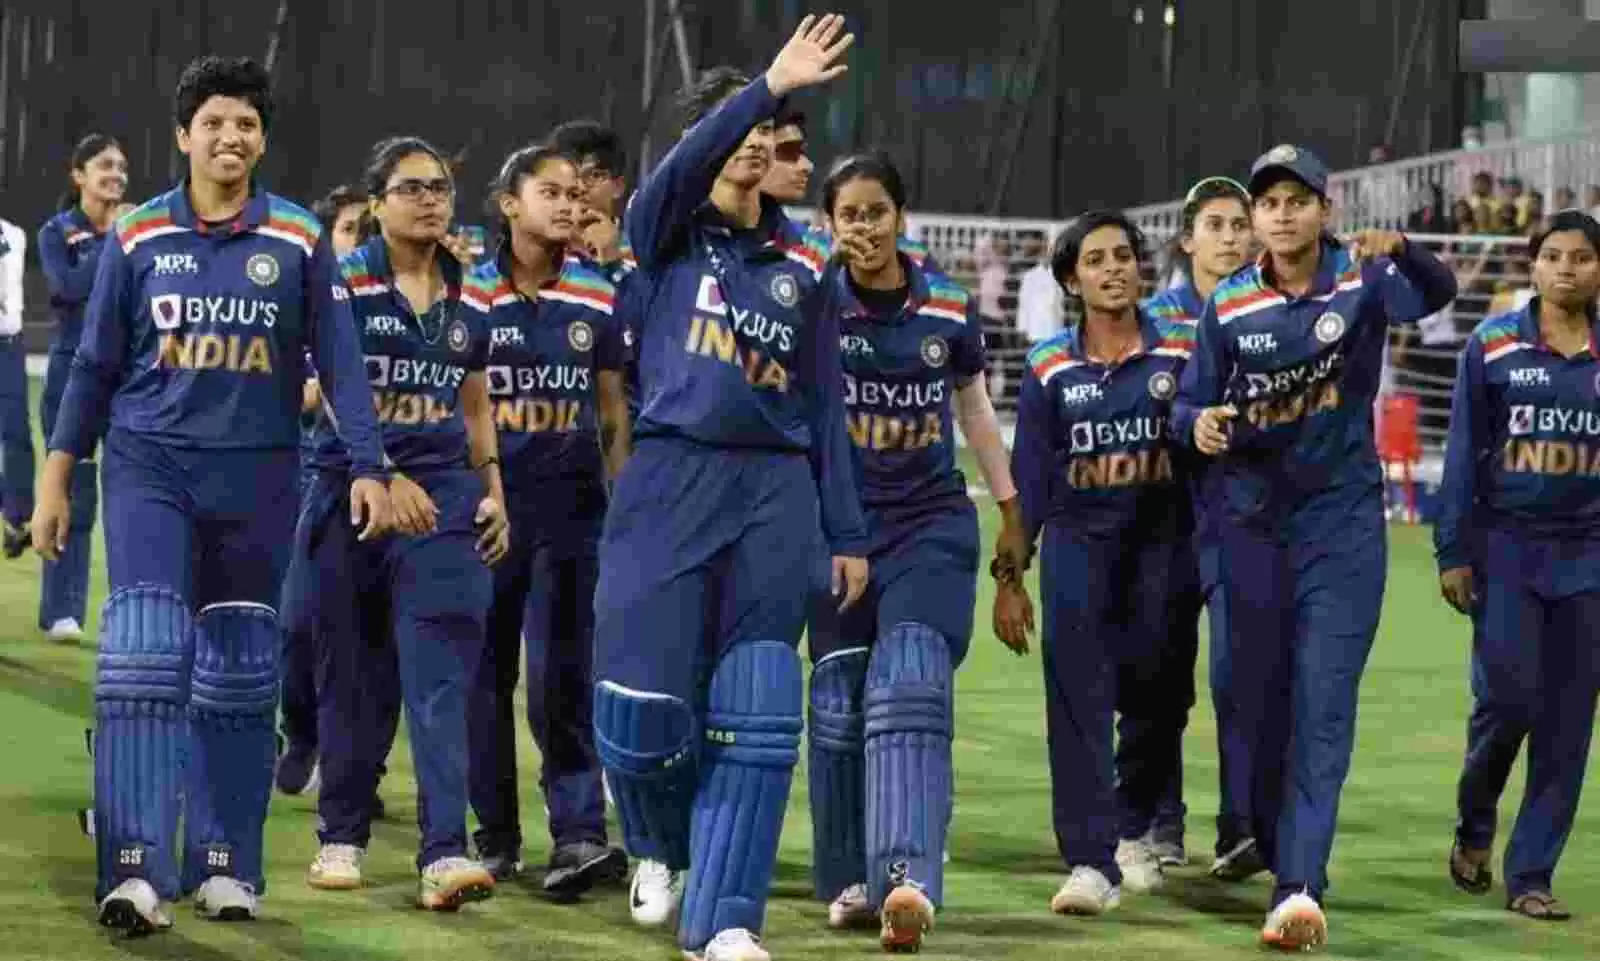 Where To Watch India Women tour of Australia: Live Streaming And TV Details For AUS-W vs IND-W ODI, T20I series and One-off Test